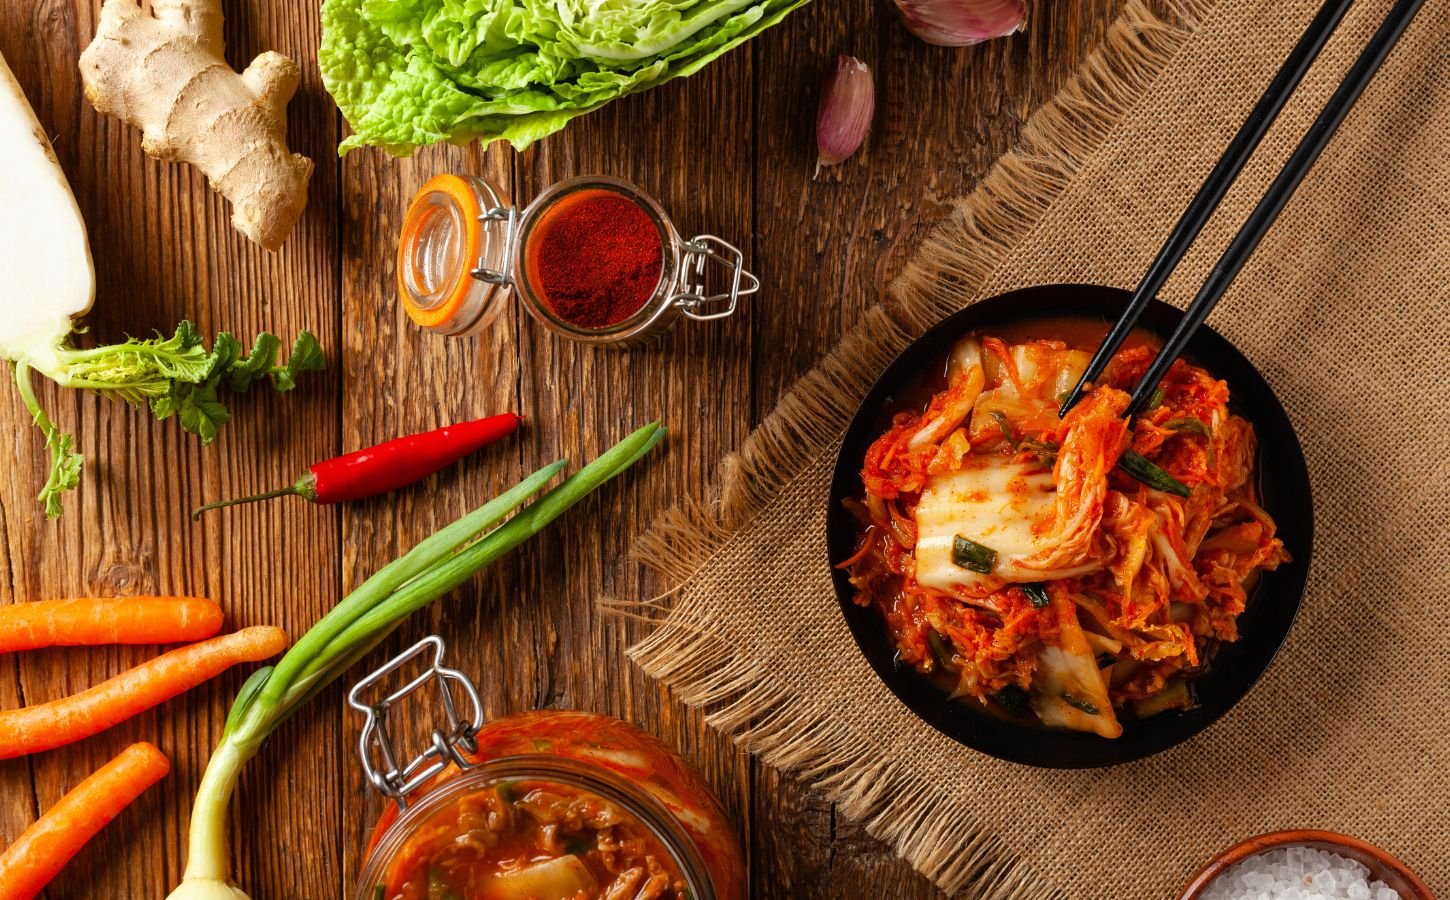 Photo shows a bowl of kimchi on a wooden tabletop surrounded by common kimchi-making ingredients like scallions, chili, and ginger